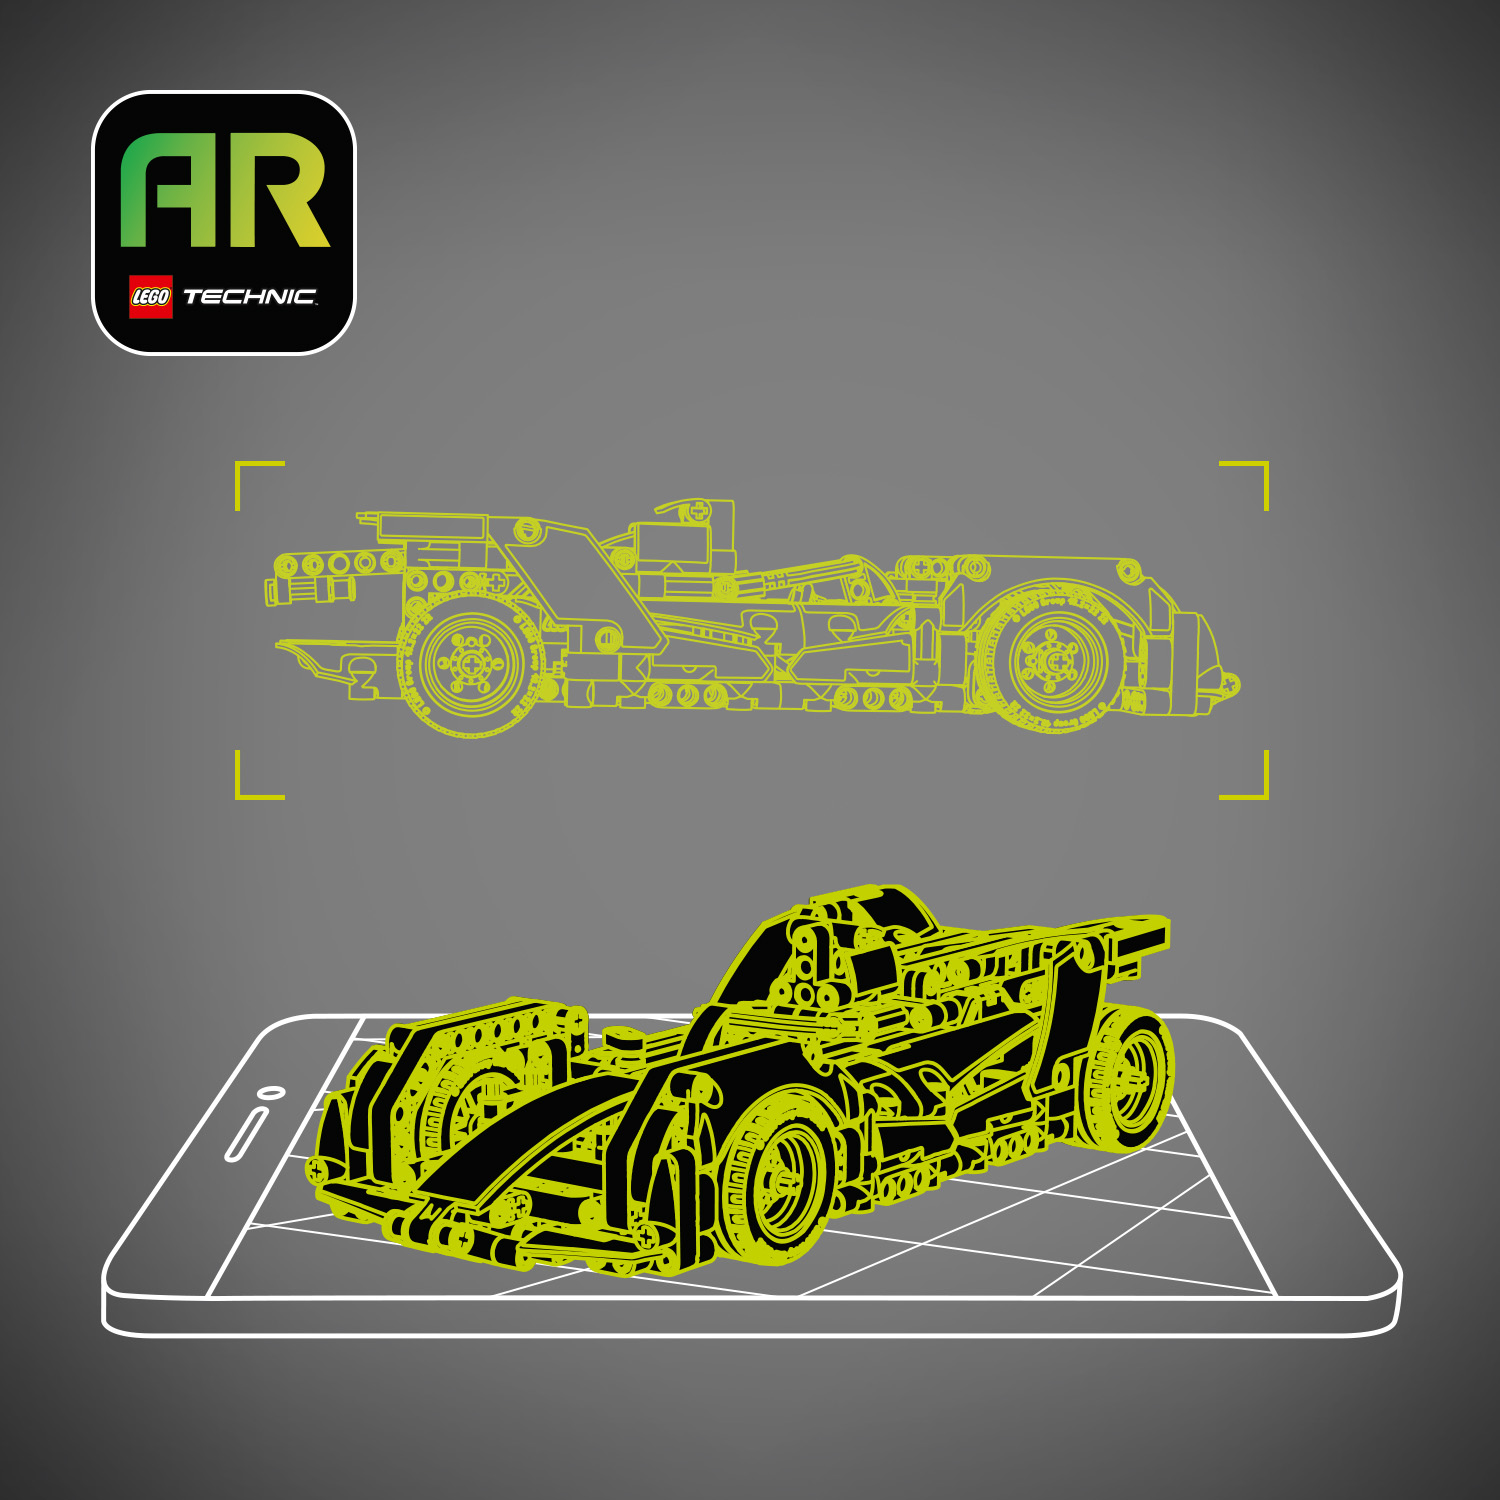 Download the AR app